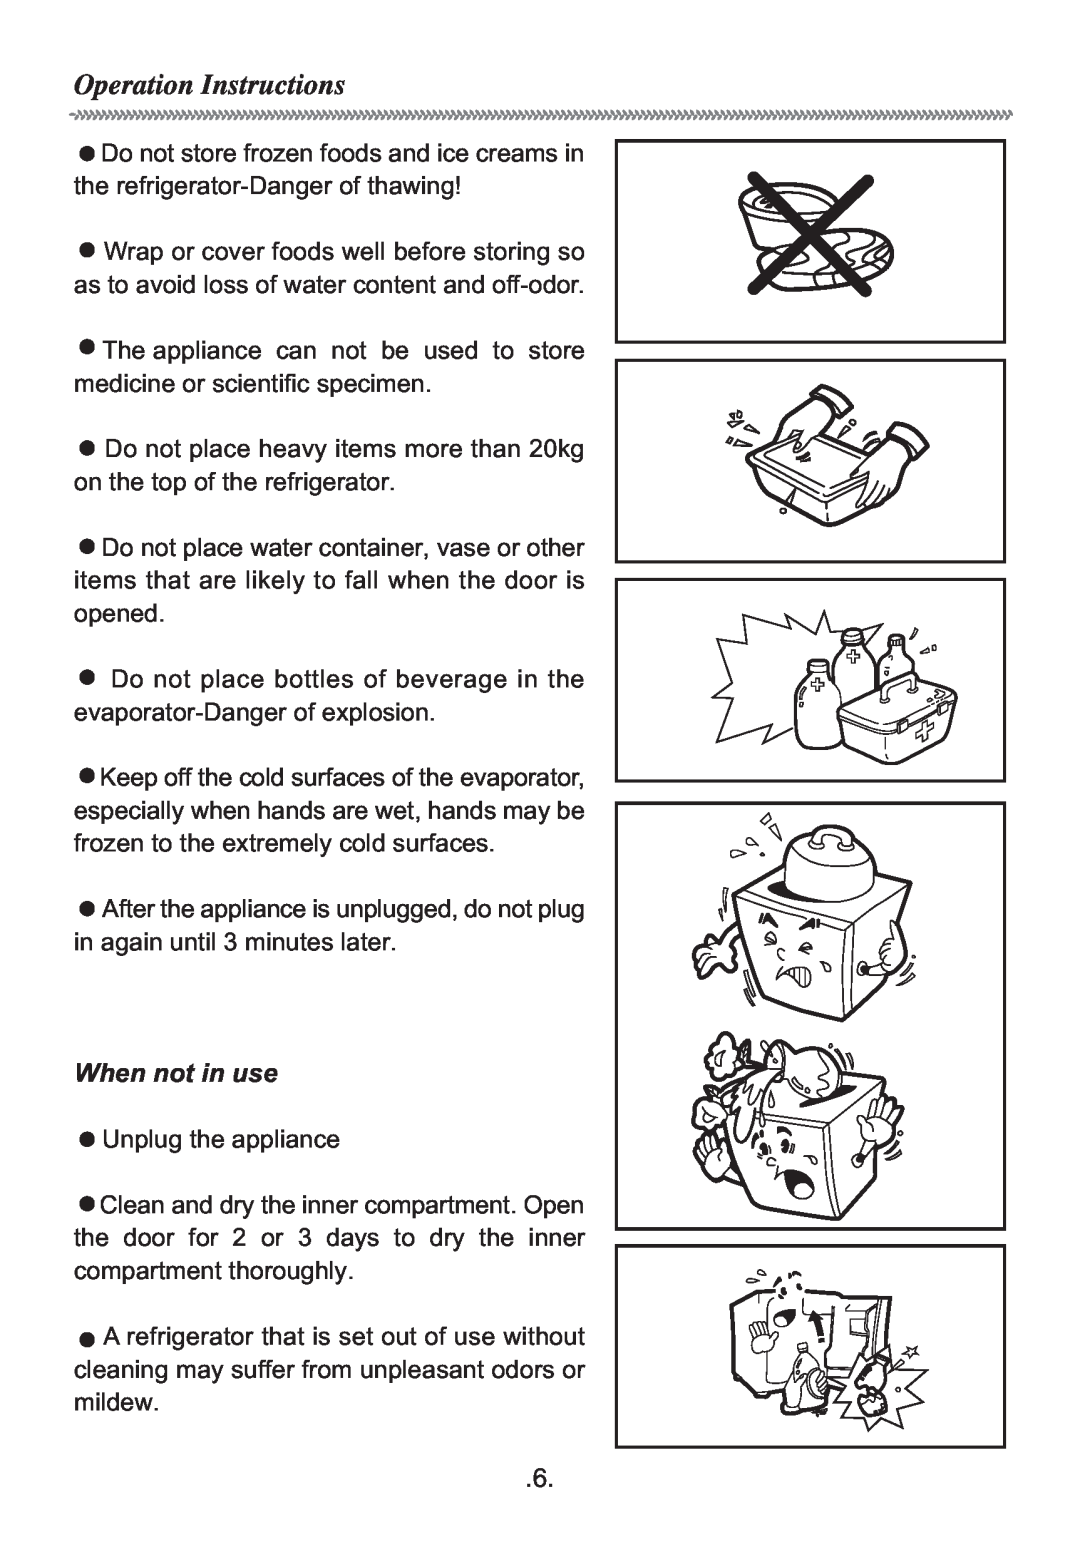 Haier HR-126 manual Operation Instructions, When not in use 